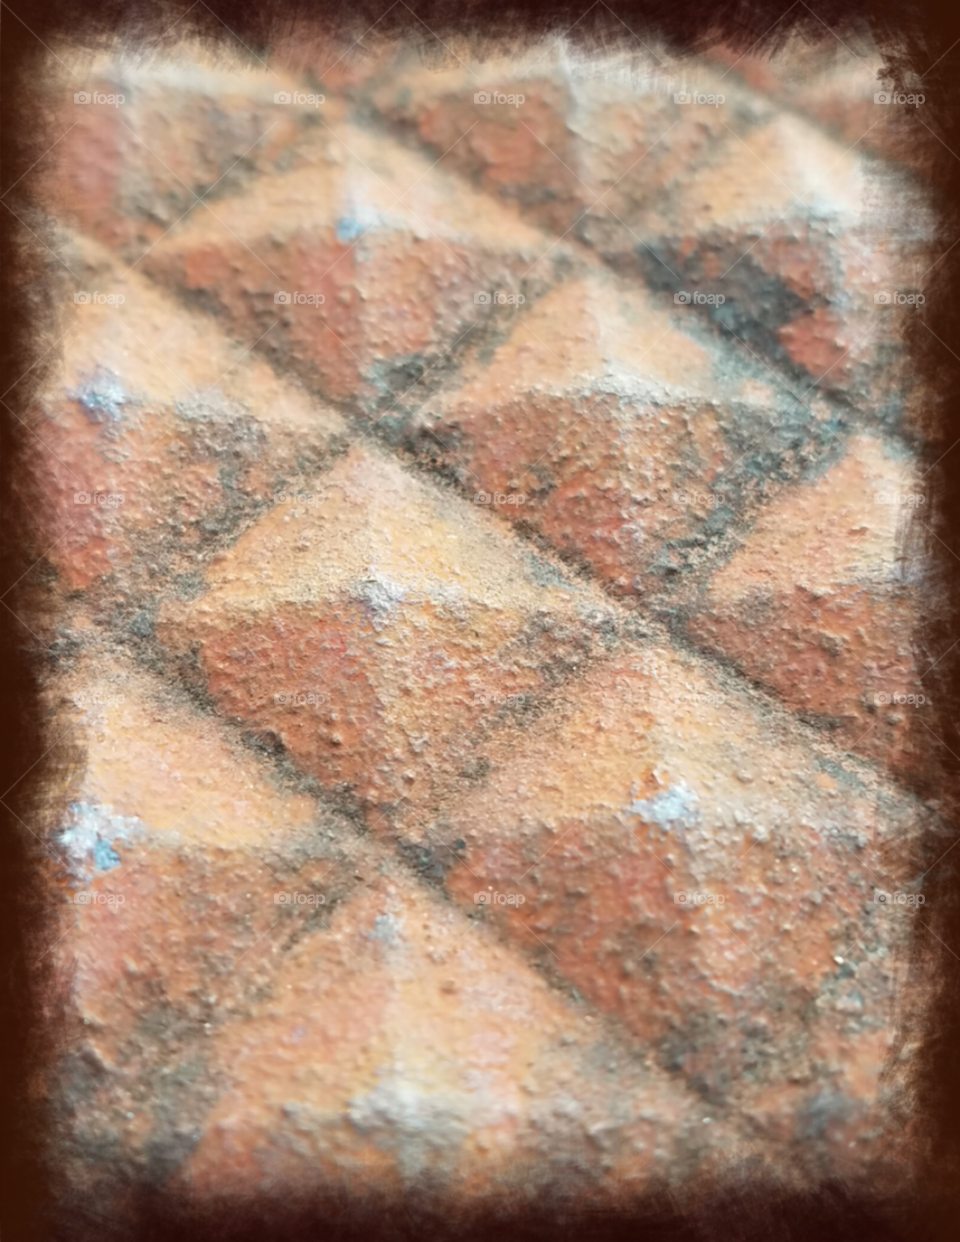 Urban Grunge, water hole cover, great hues of clay and worn patina look.